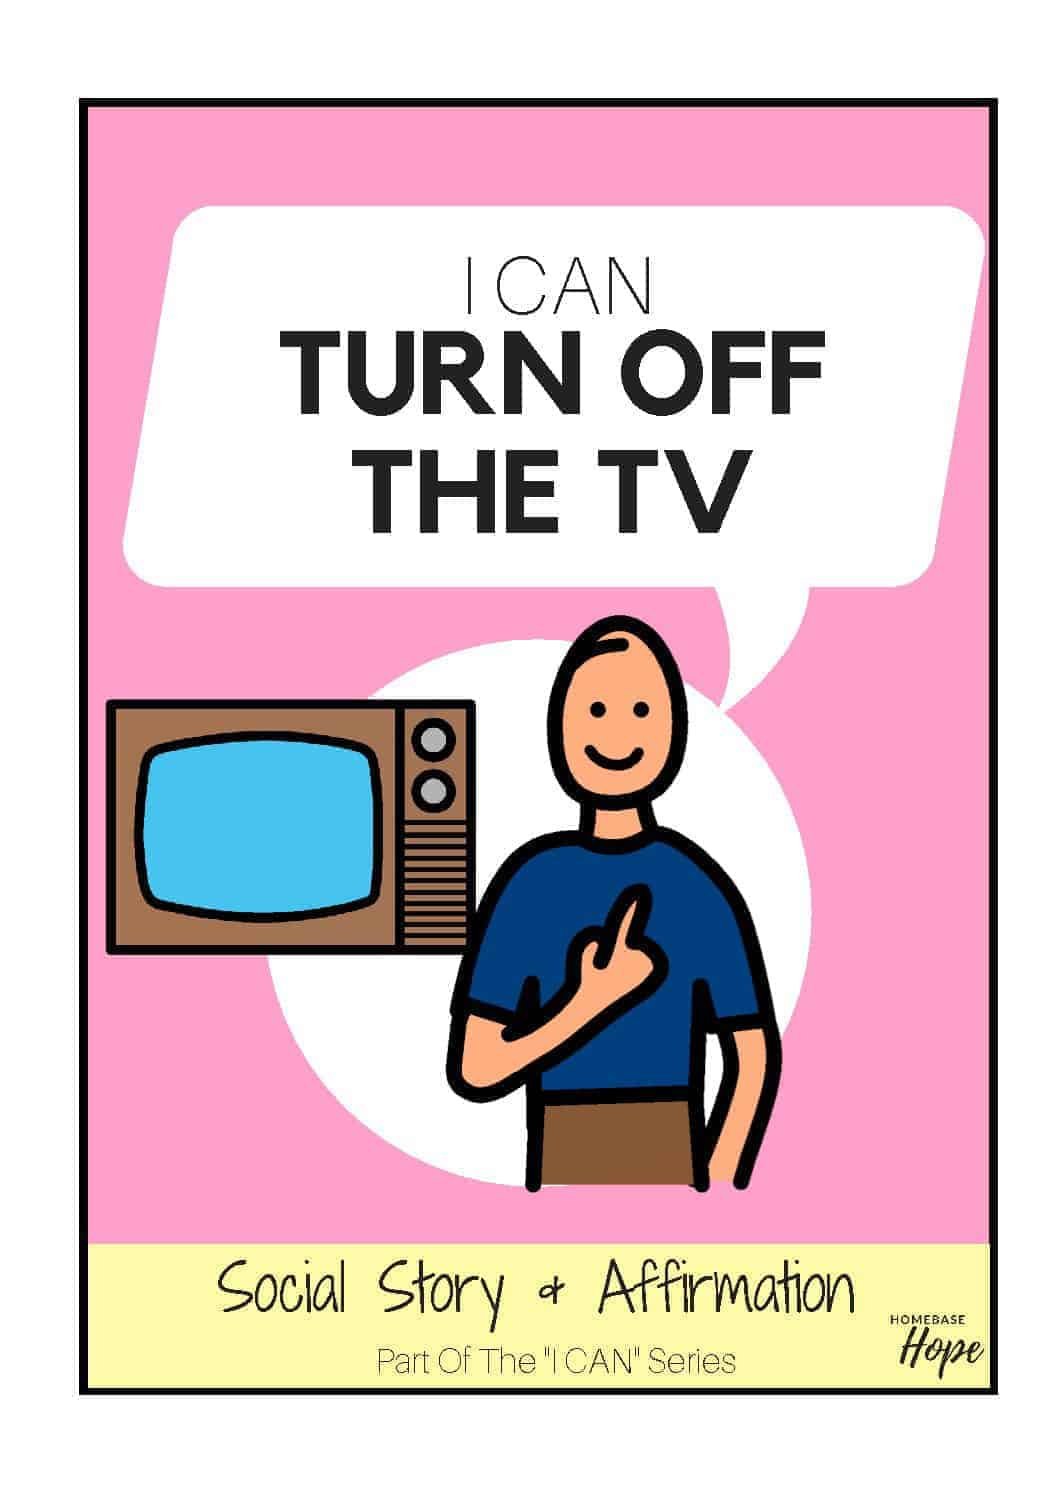 Can you turn the tv